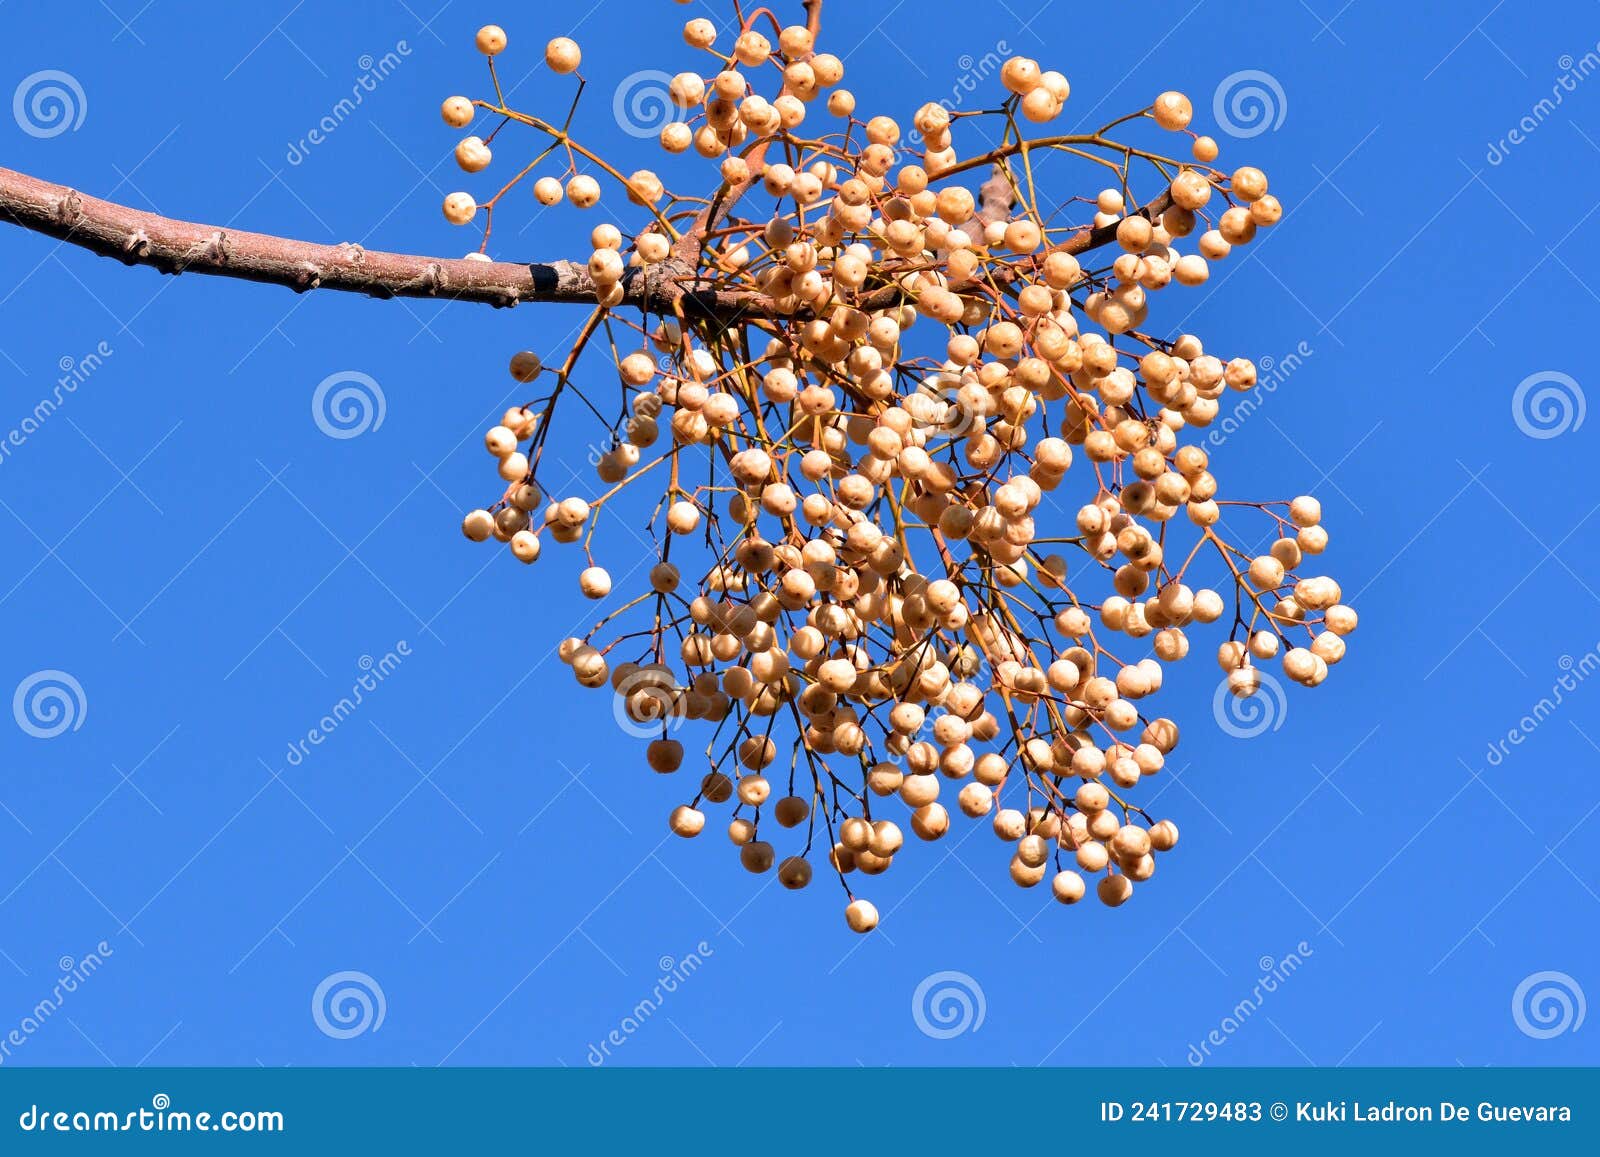 fruits on the branches of the paradise tree